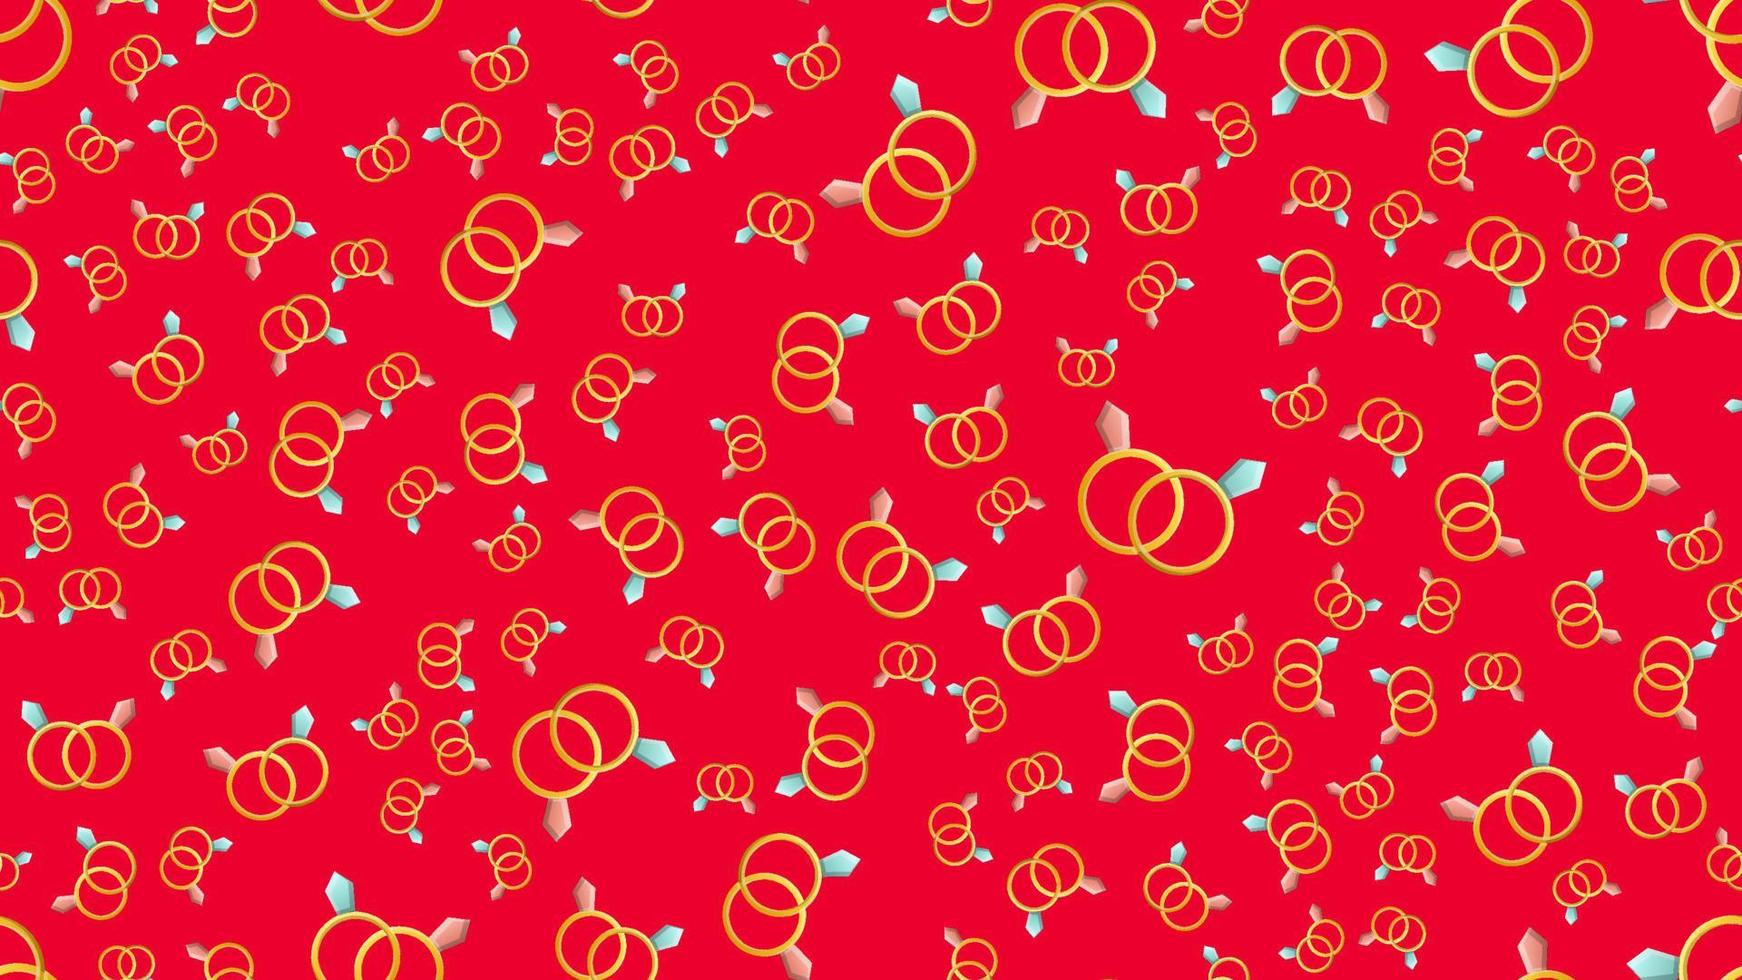 Endless seamless pattern of beautiful festive love joyful expensive gold precious jewelry wedding rings with diamonds on a red background. Vector illustration